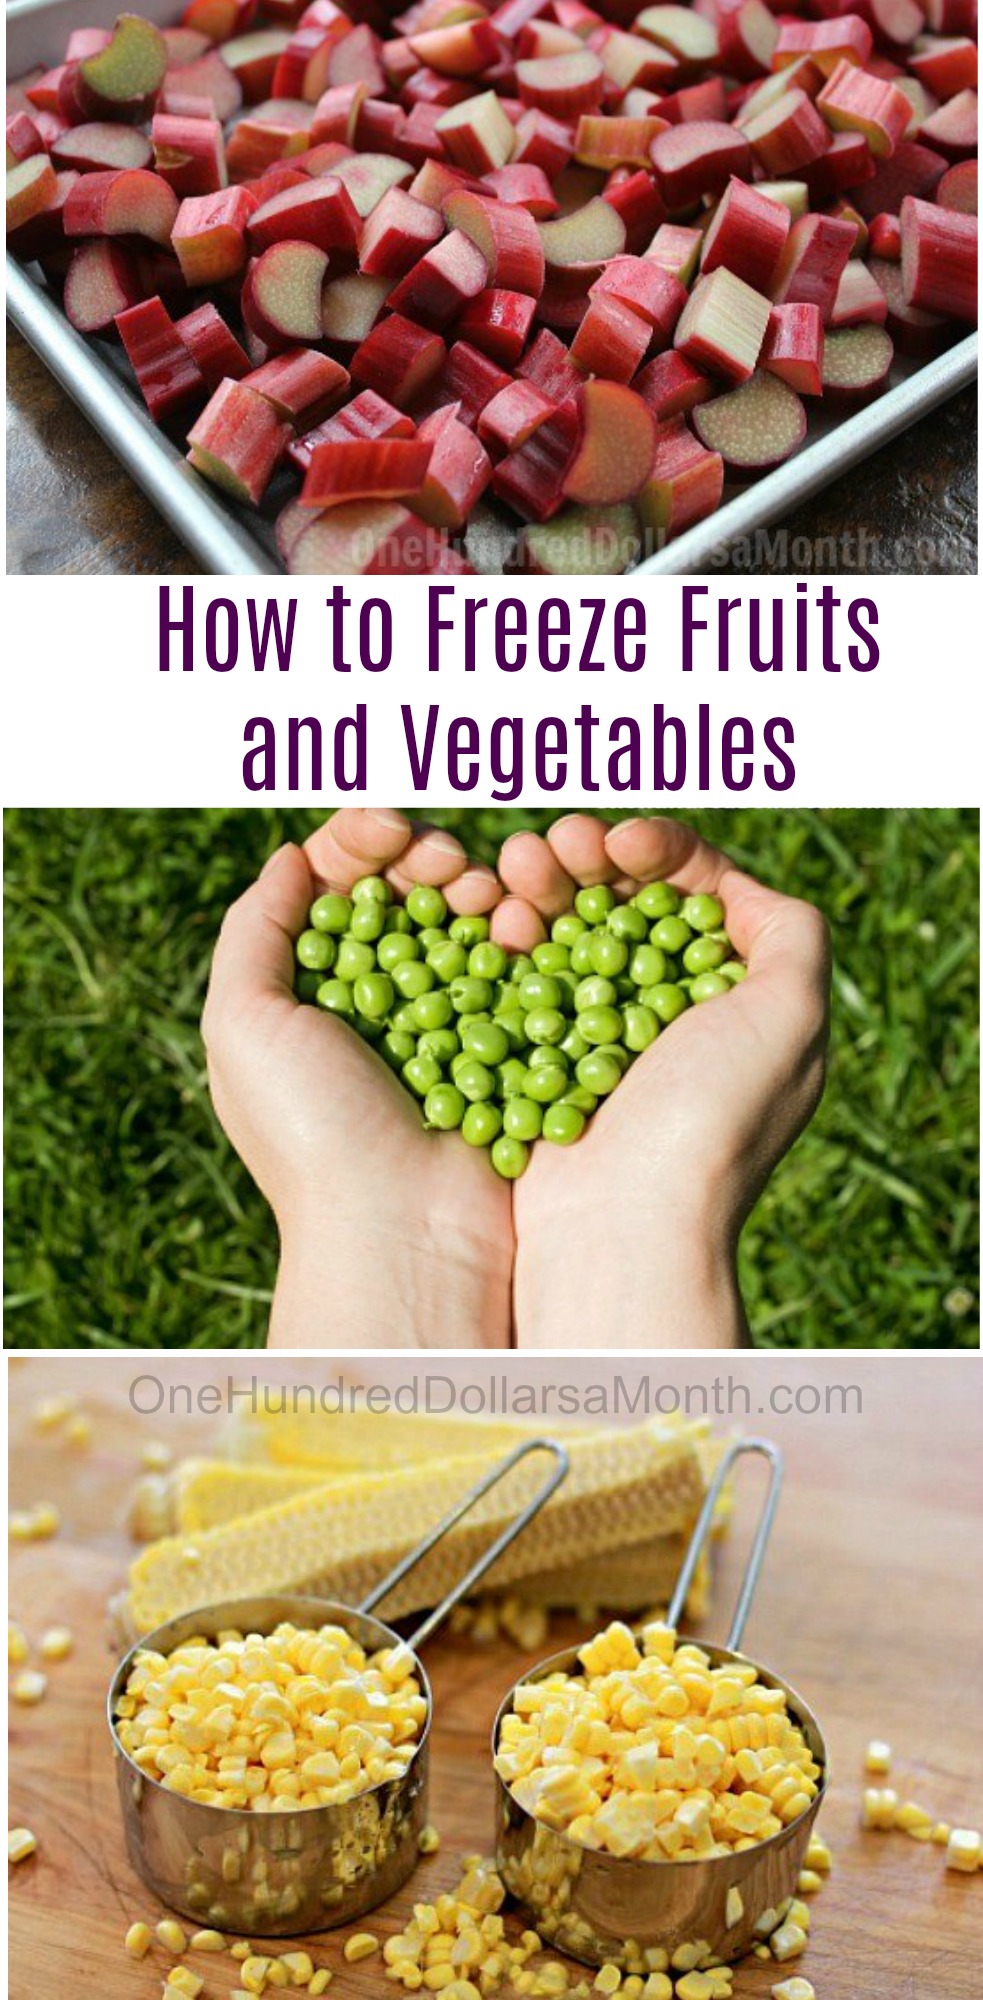 How to Freeze Fruits and Vegetables